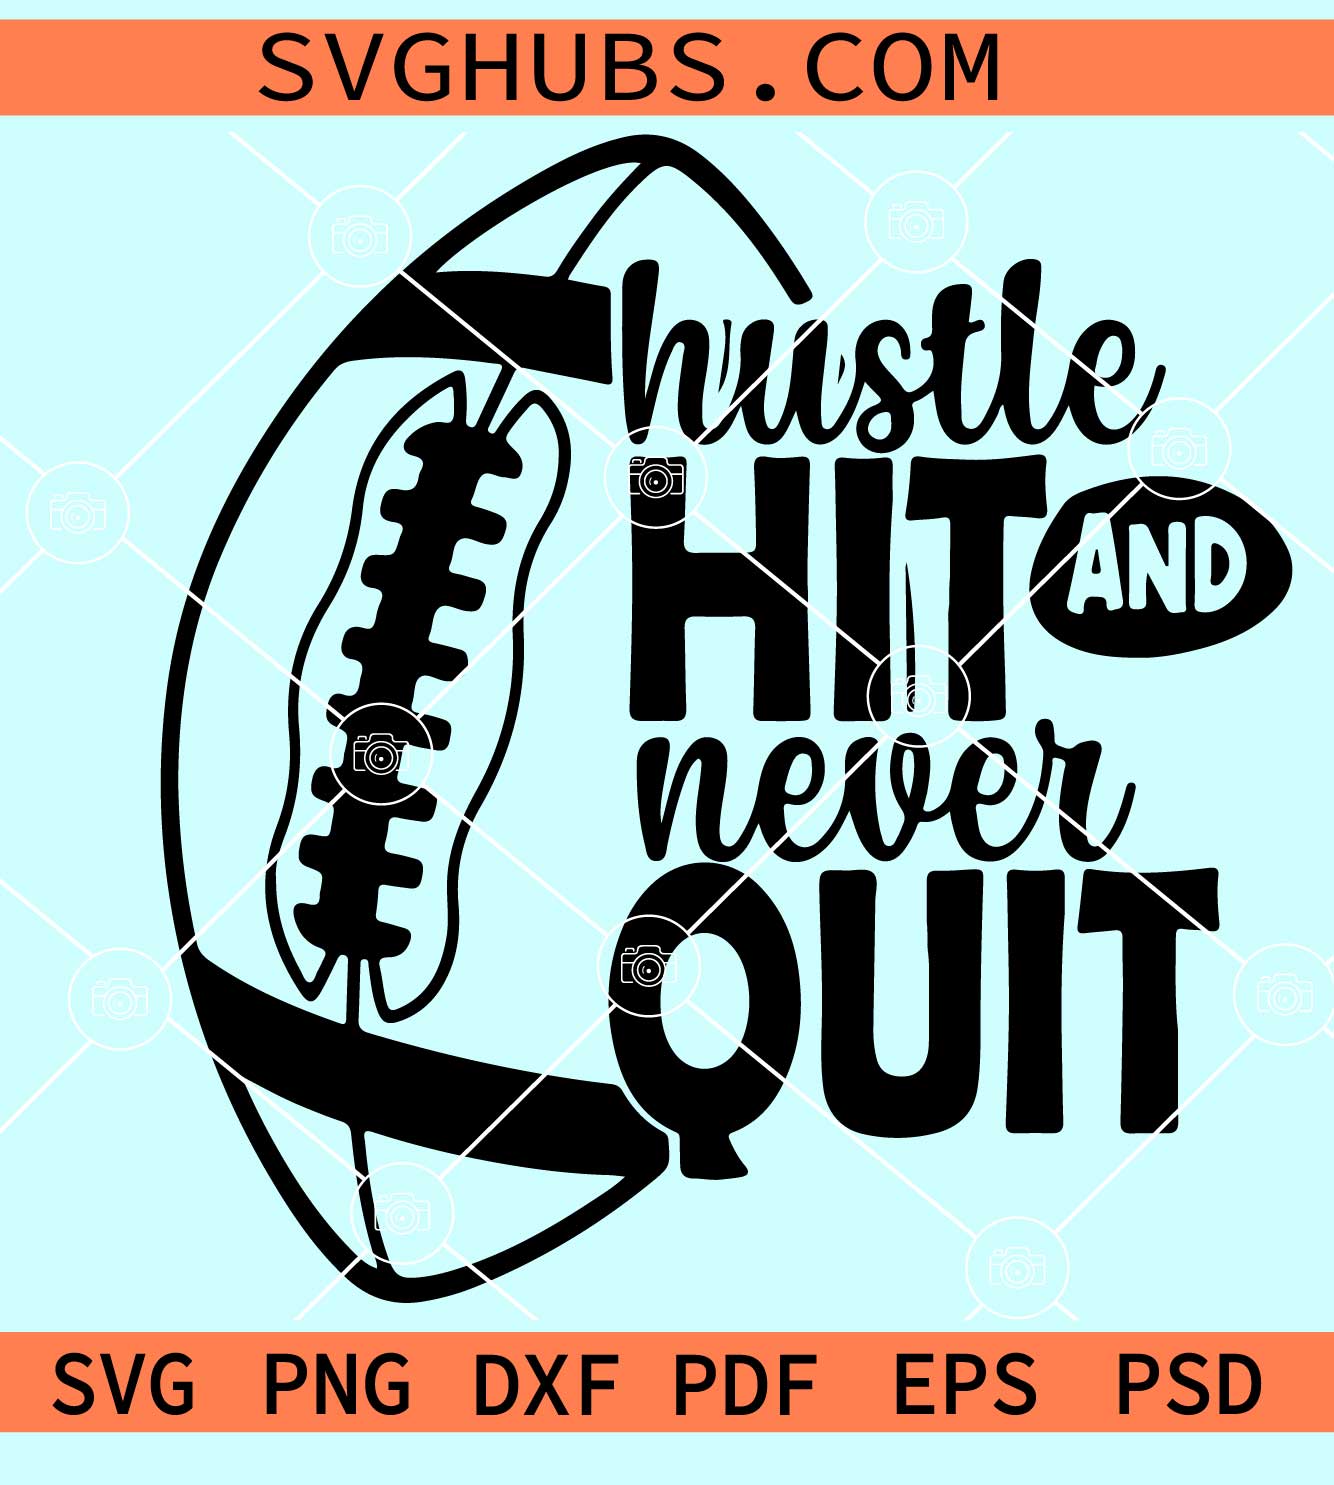 Hustle hit and never quit SVG